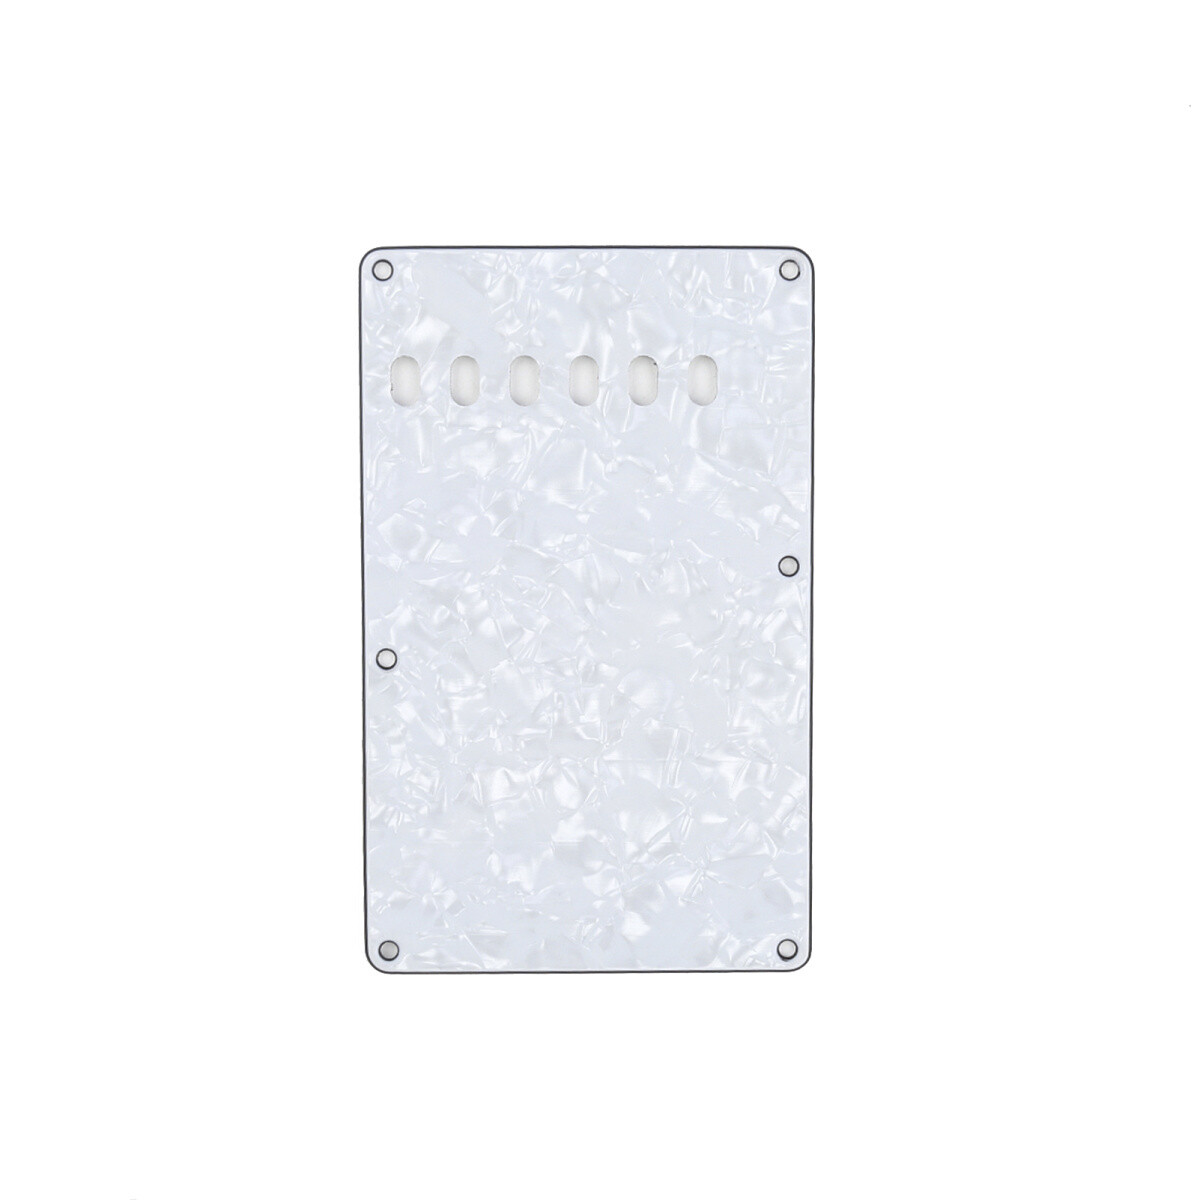 Brio Pearl White Vintage Style Back Plate Tremolo Cover 4 ply - US/Mexican Fender®Strat® Fit